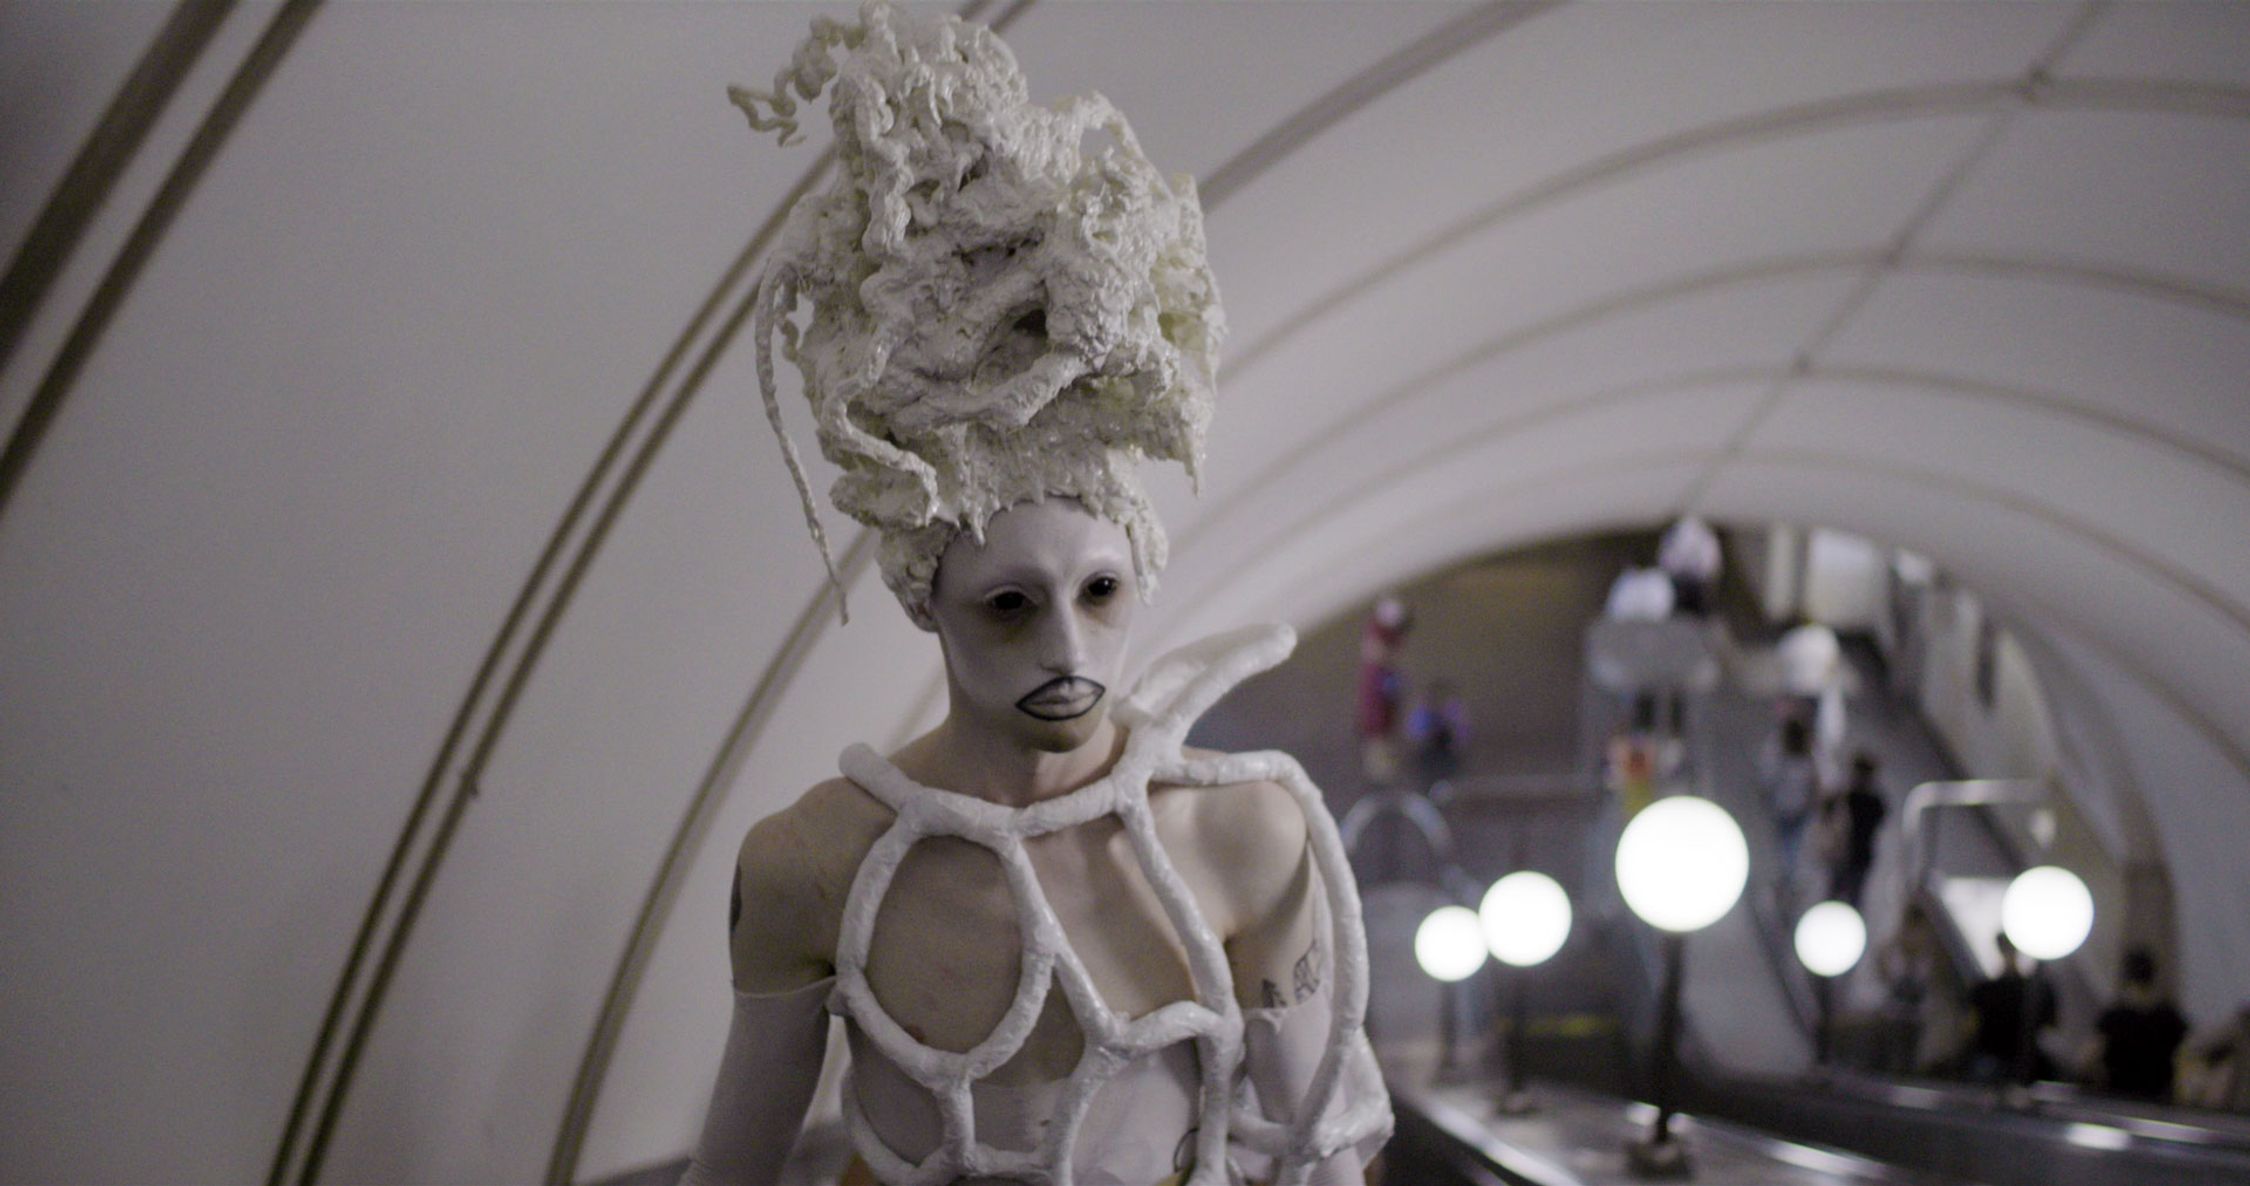 A figure with an avant-garde appearance is positioned in the foreground, dressed in what appears to be a white costume with structural, organic shapes enveloping the body and an elaborate headpiece resembling a stylized, textured wig or headdress. The figure's face is painted white, with darkened eyes and lips, and exhibits a neutral expression. The background shows an interior space with curved architecture and multiple people in motion, possibly a subway station or a public concourse, with a softly blurred focus that suggests movement and life happening around the still, striking figure in the foreground.